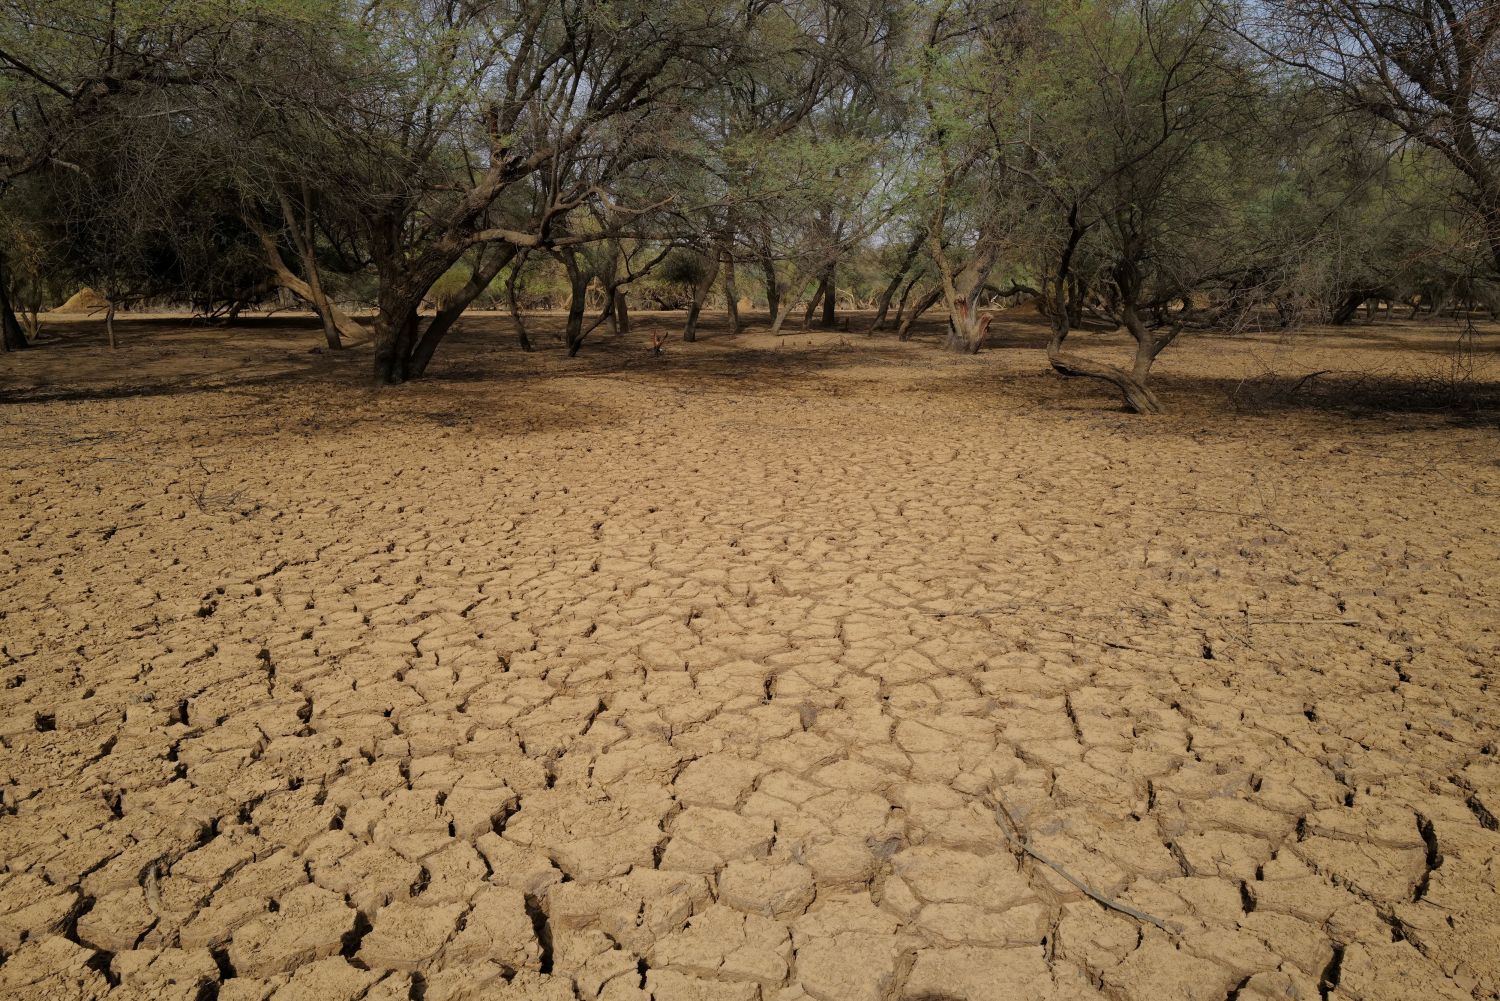 Dry earth is pictured in a field, in an area that is part of the Great Green Wall of the Sahara and the Sahel, on the outskirts of Walalde department, in Senegal, July 11, 2021. The Green Wall initiative was launched in 2007 with aims to slow desertification across Africa's Sahel region, the arid belt south of the Sahara Desert, by planting a line of trees from Senegal to Djibouti. REUTERS/Zohra Bensemra SEARCH "BENSEMRA REFORESTATION" FOR THIS STORY. SEARCH "WIDER IMAGE" FOR ALL STORIES